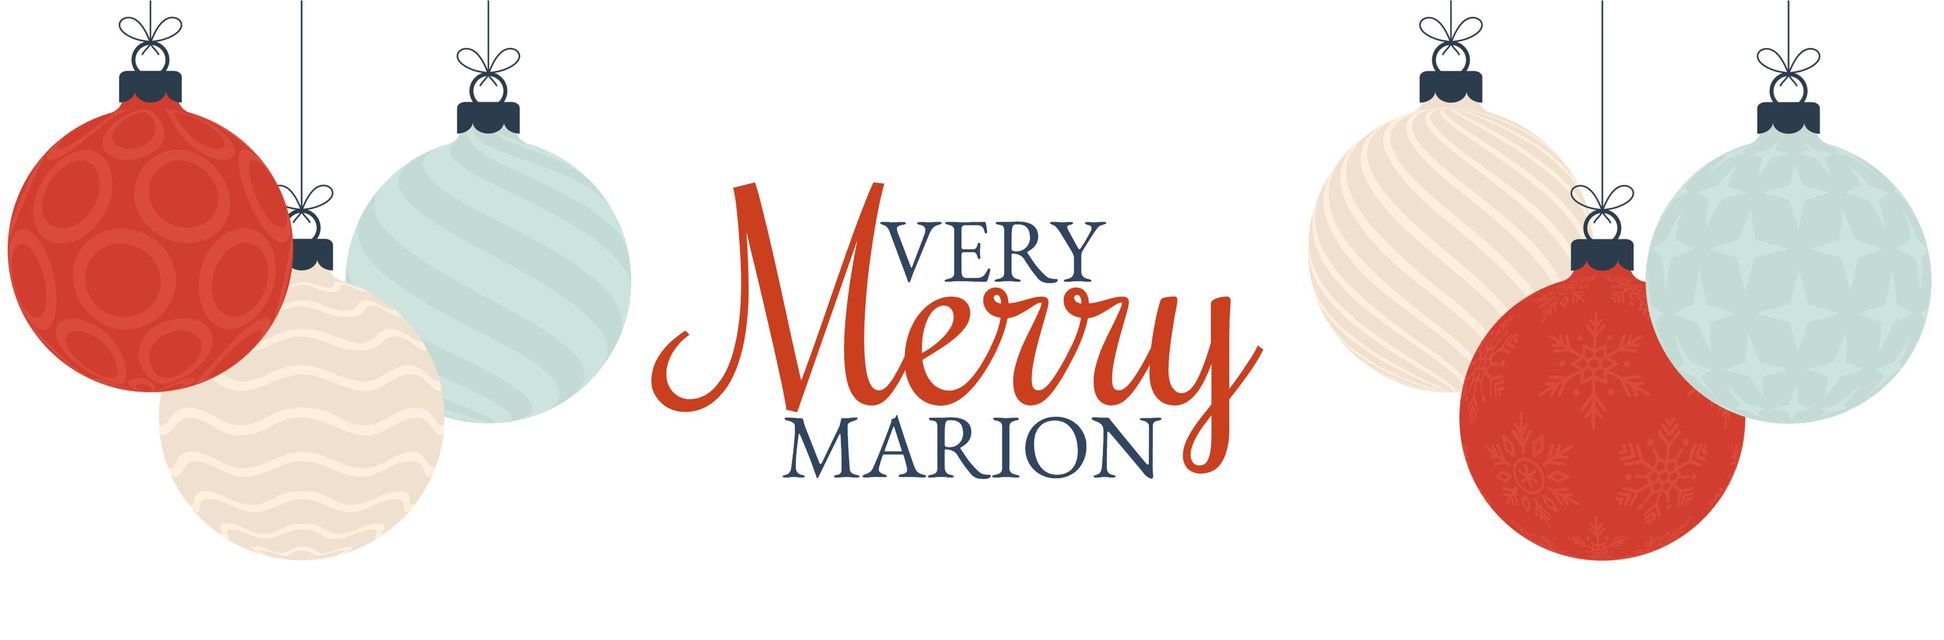 Very Merry Marion